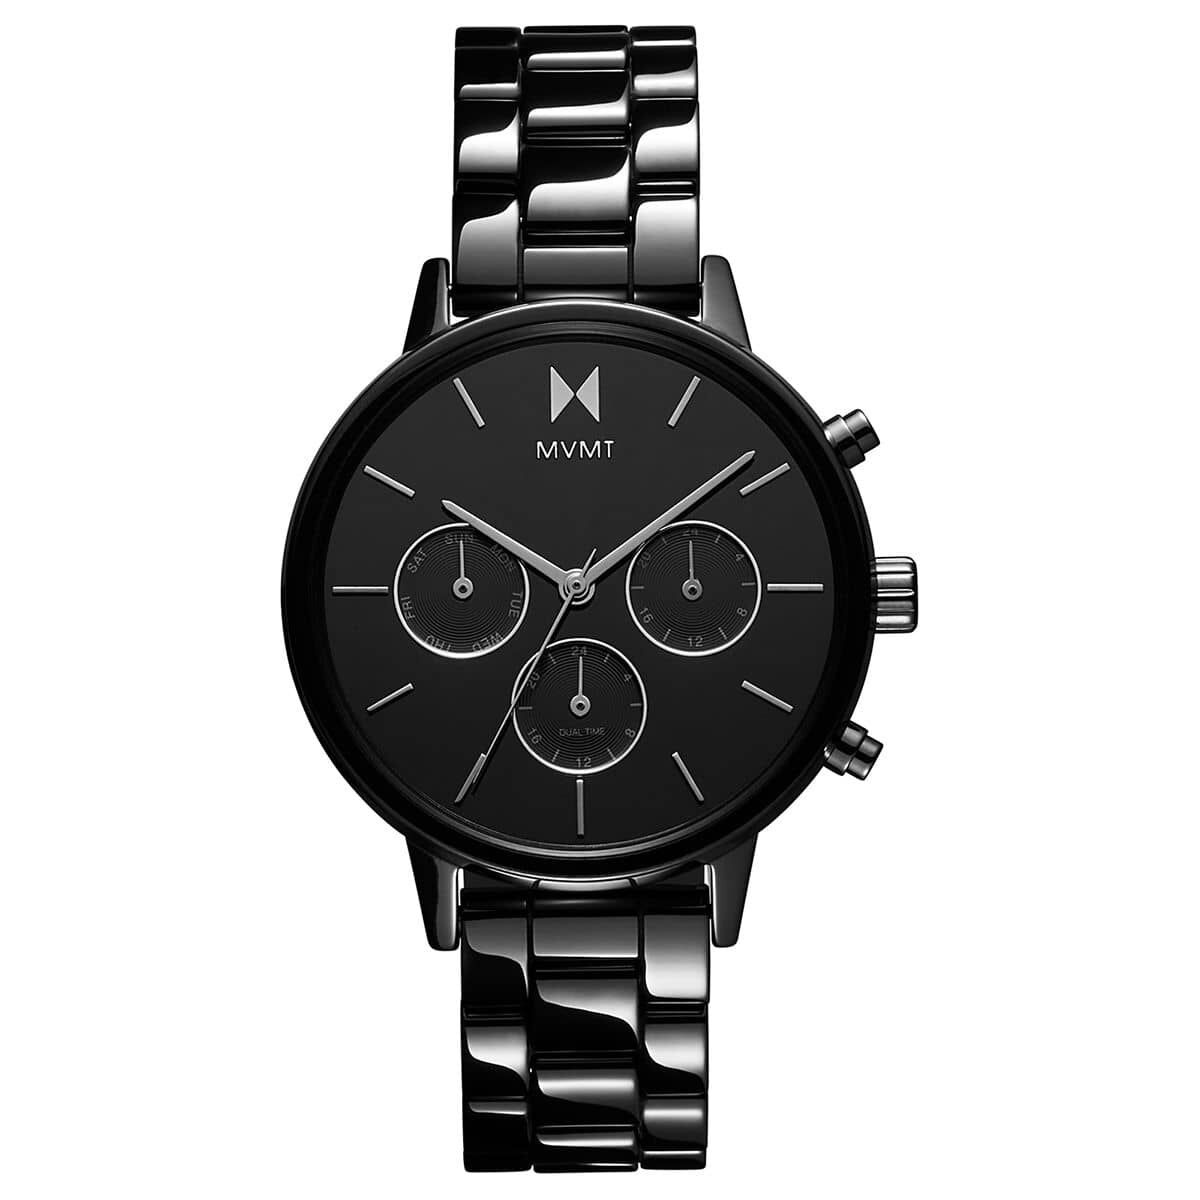 NOVA Black Series Analog Watch - For Men - Buy NOVA Black Series Analog  Watch - For Men Premium Black Dial & Leather Strap Wrist Watch with  Japanese Technology Online at Best